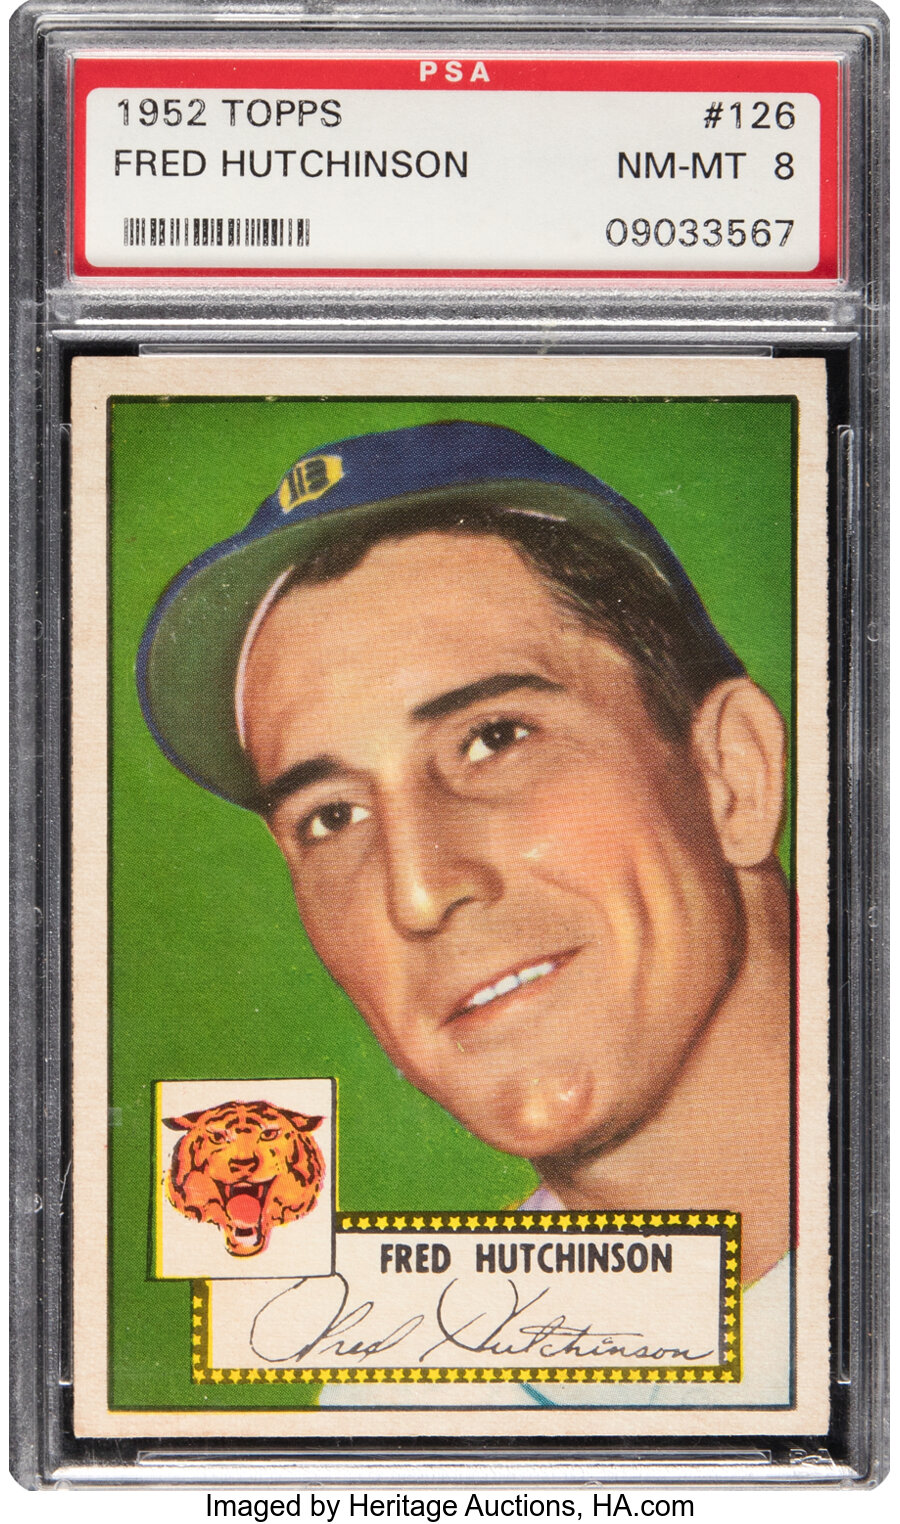 1952 Topps Fred Hutchinson #126 PSA NM-MT 8 - Six Higher!